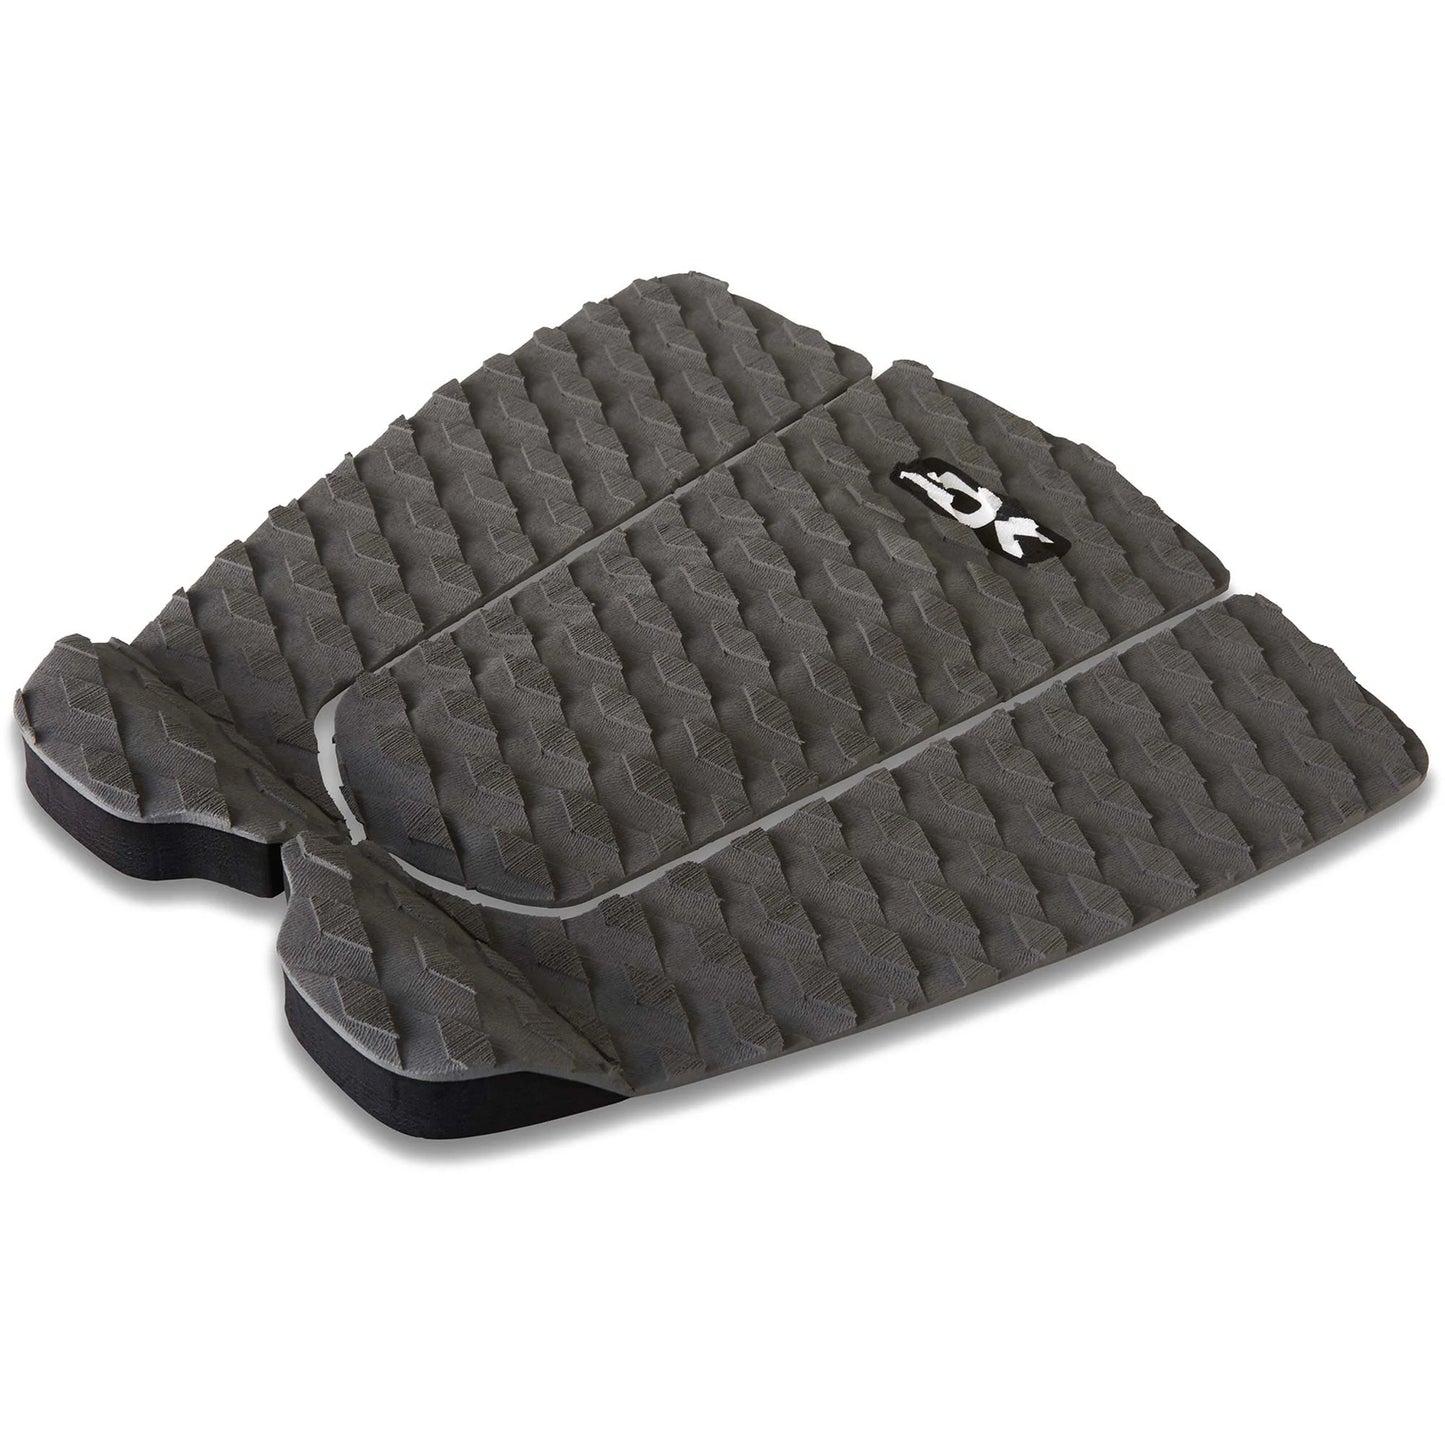 Andy Irons Pro Surf Traction Pad